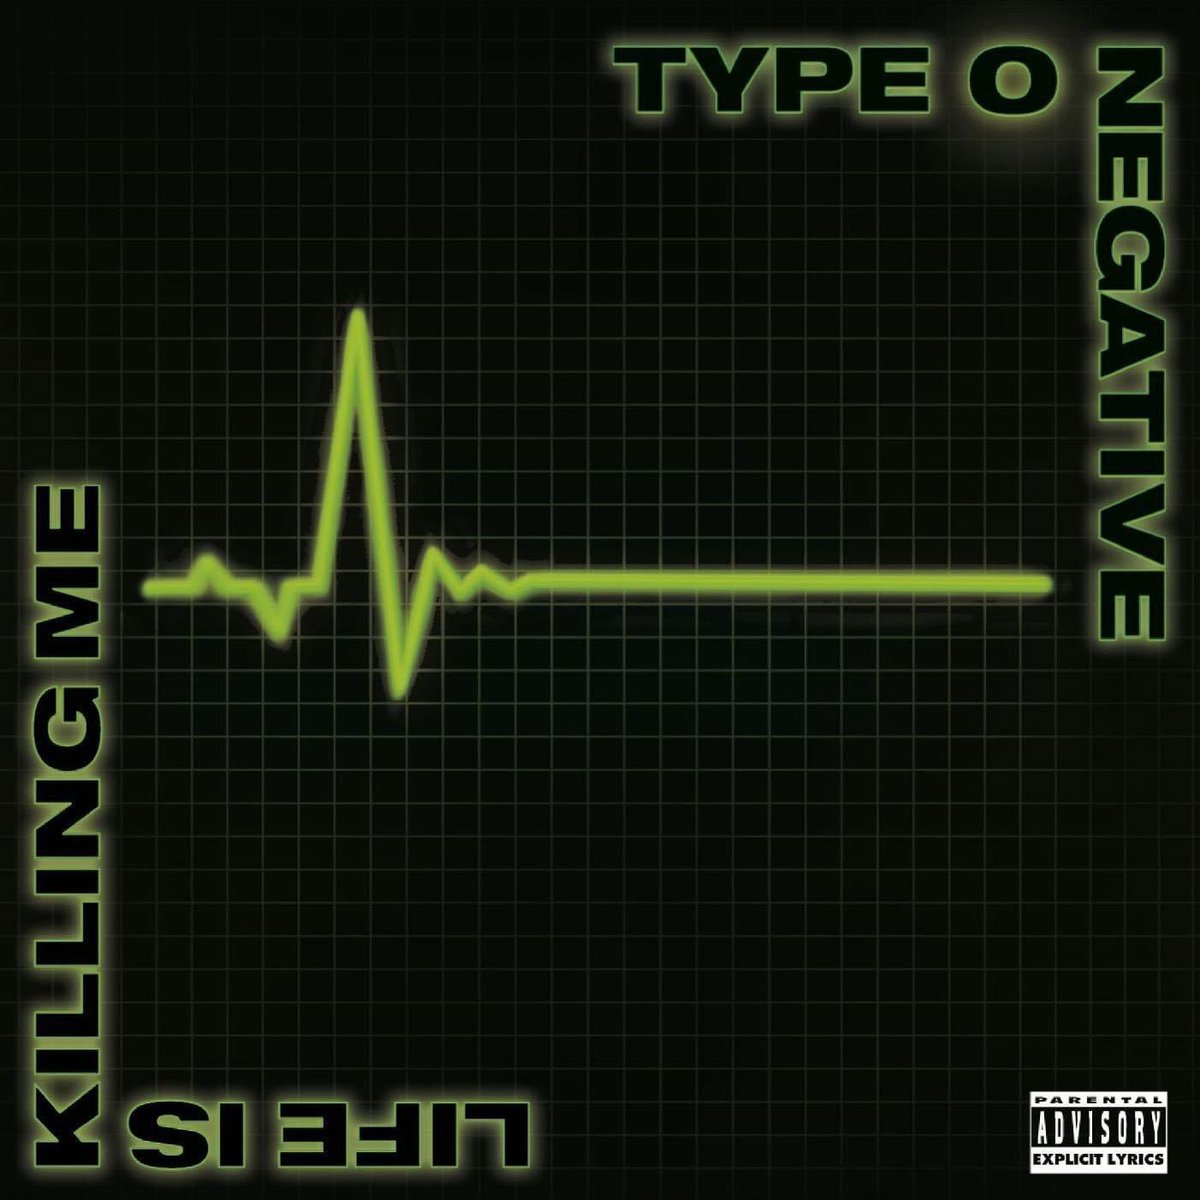 June 17th 2003 #TypeONegative released the album “Life Is Killing Me” #TheDreamIsDead #Anesthesia #Nettie #GothicMetal 

Did you know…
The album reached number 39 on the US Billboard 200 chart.
The Europe bonus disc included a cover of the Black Sabbath song “Black Sabbath”